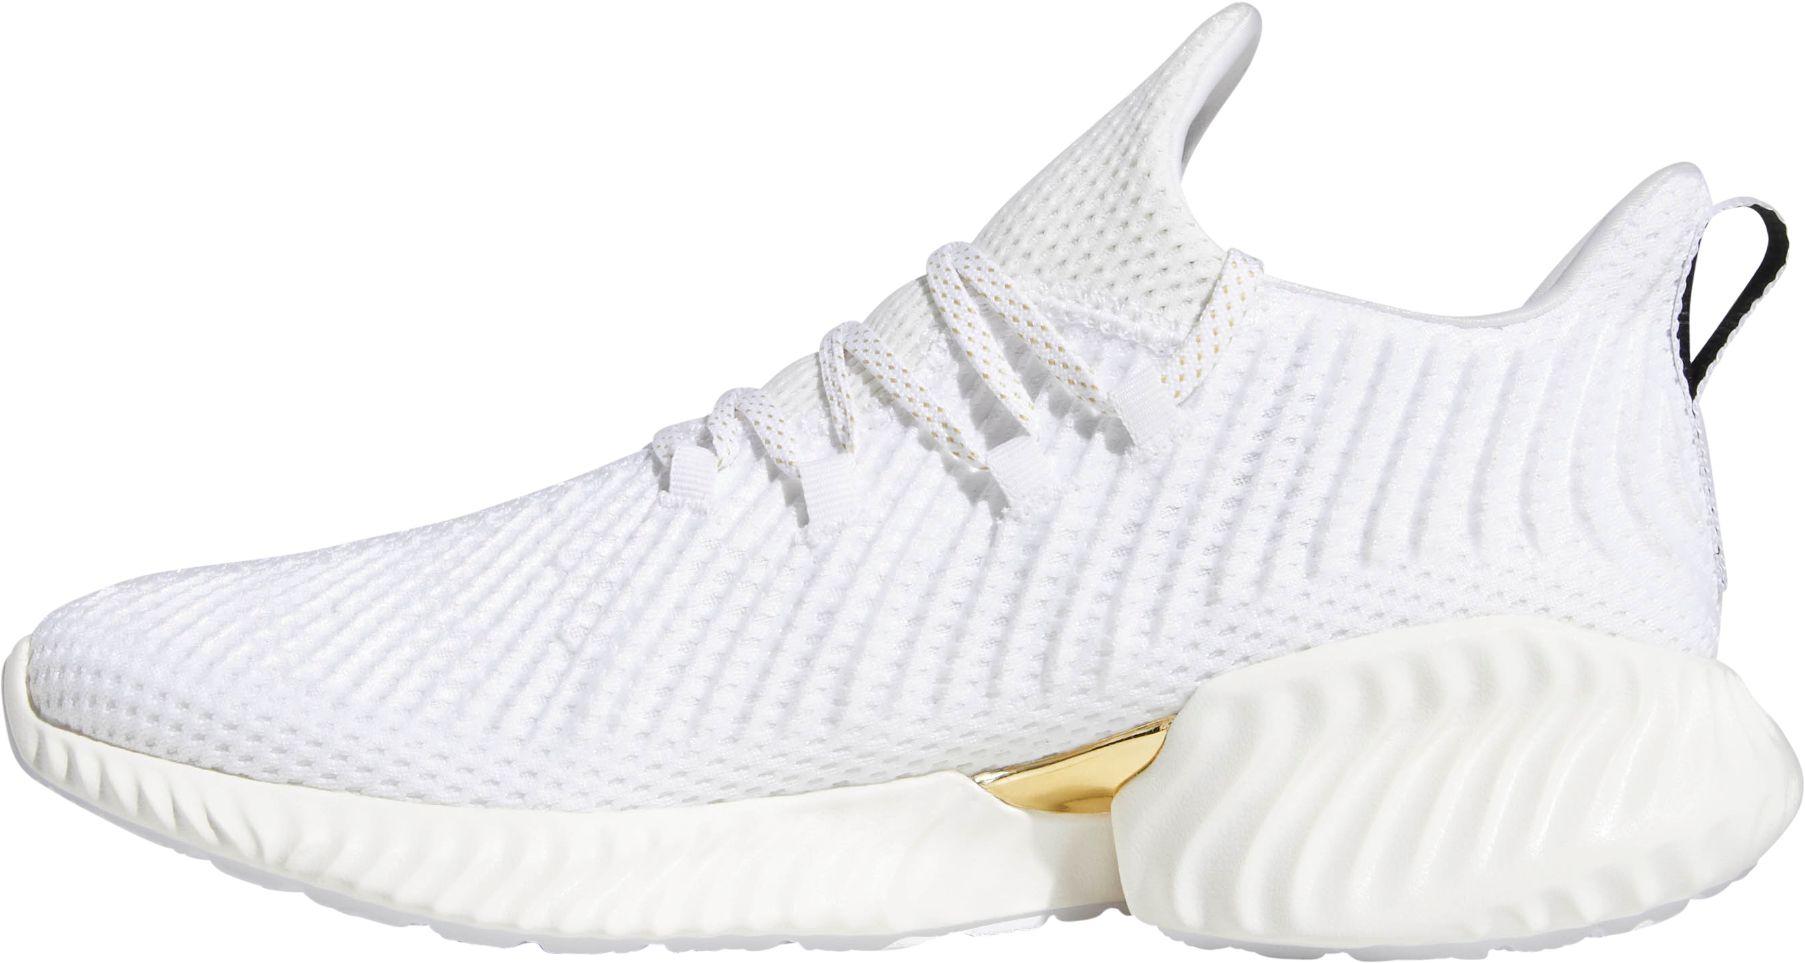 Adidas Alphabounce White And Gold Outlet Online, Up to 55% OFF